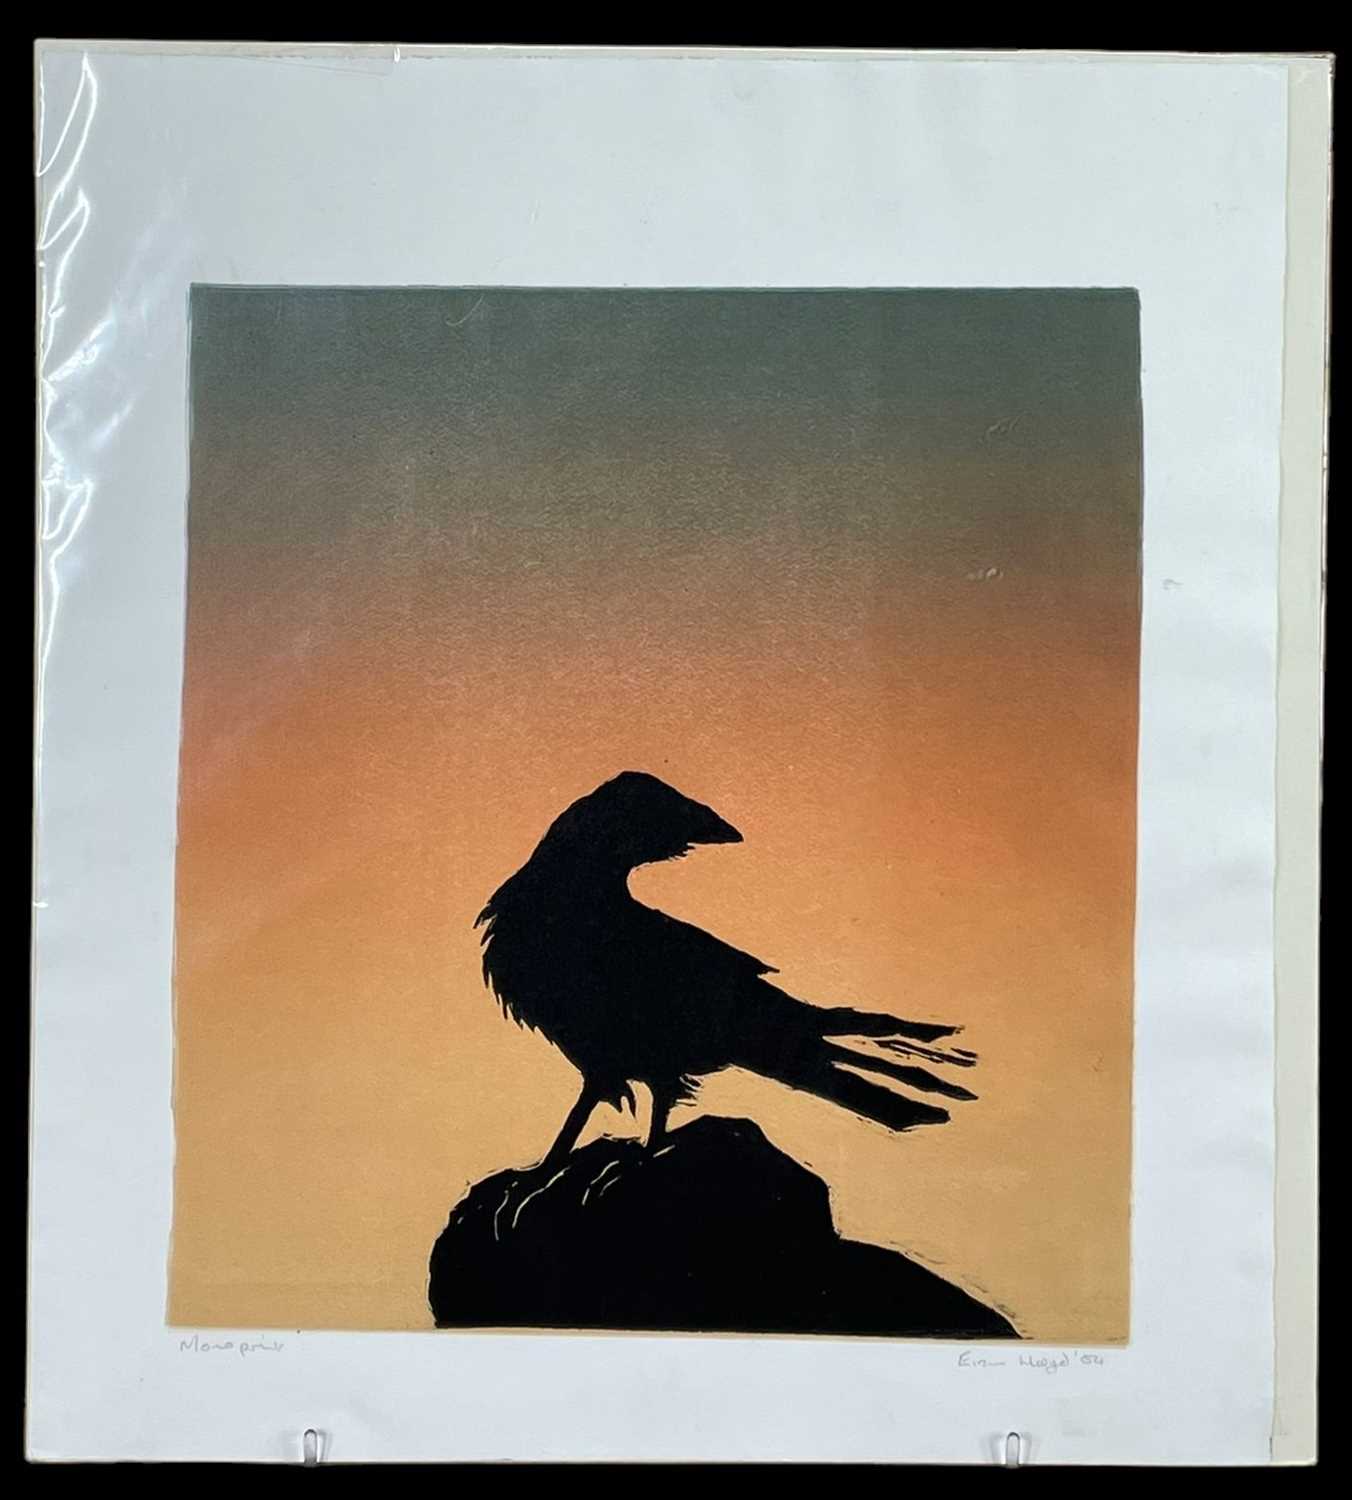 ‡ EIRIAN LLOYD monoprint - Crow, silhouette of bird on a rock at sunset, signed and dated '04, 49 - Image 2 of 2